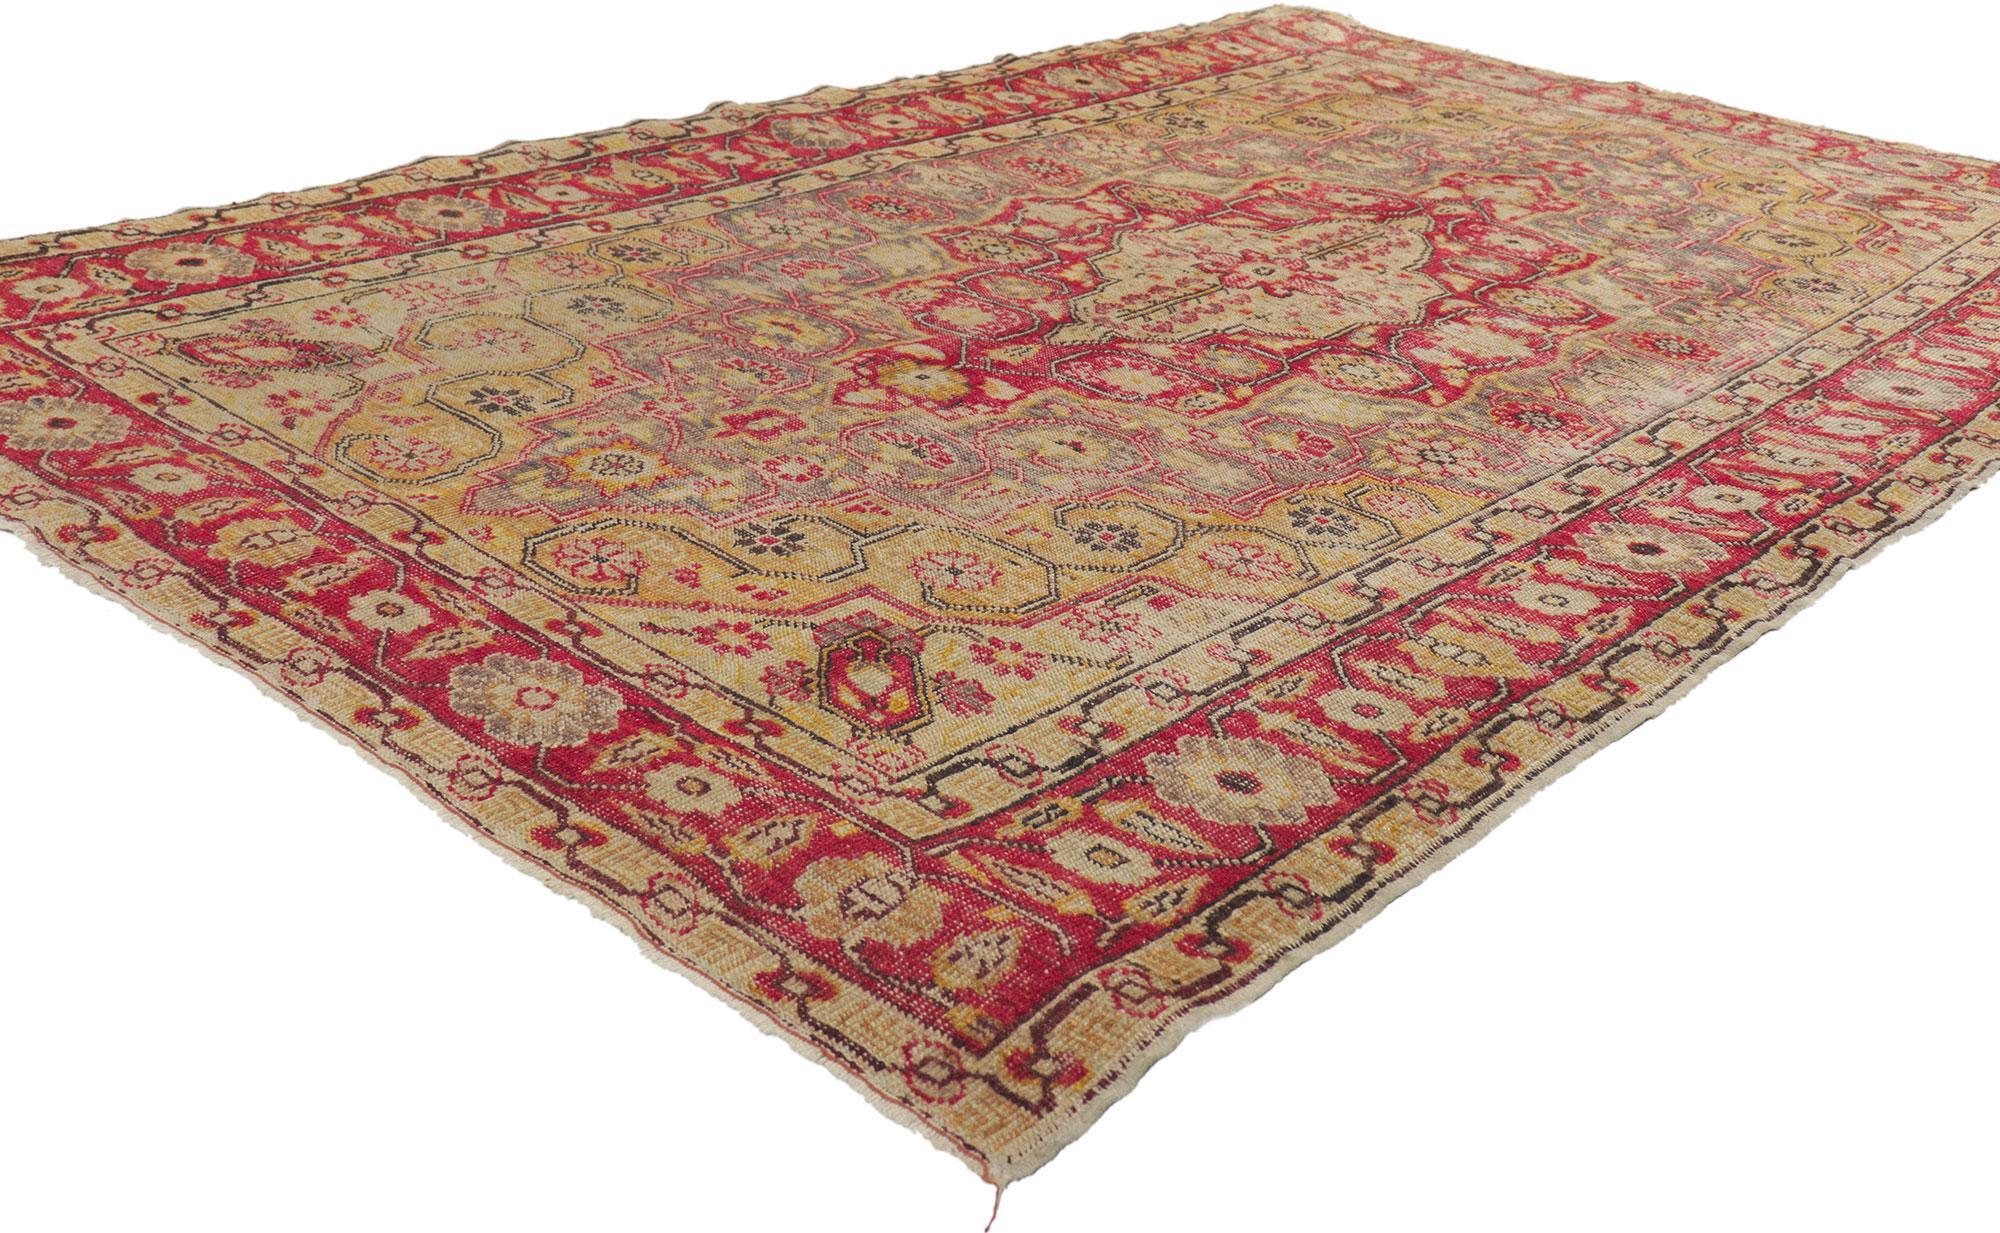 73906 Rustic Vintage Turkish Sivas Rug, 04'05 x 06'11.
Rendered in variegated shades of red, purple, gold, tan, beige, and brown with other accent colors.
Distressed. Desirable Age Wear.
Abrash.
Hand knotted wool.
Made in Turkey.
Measures: